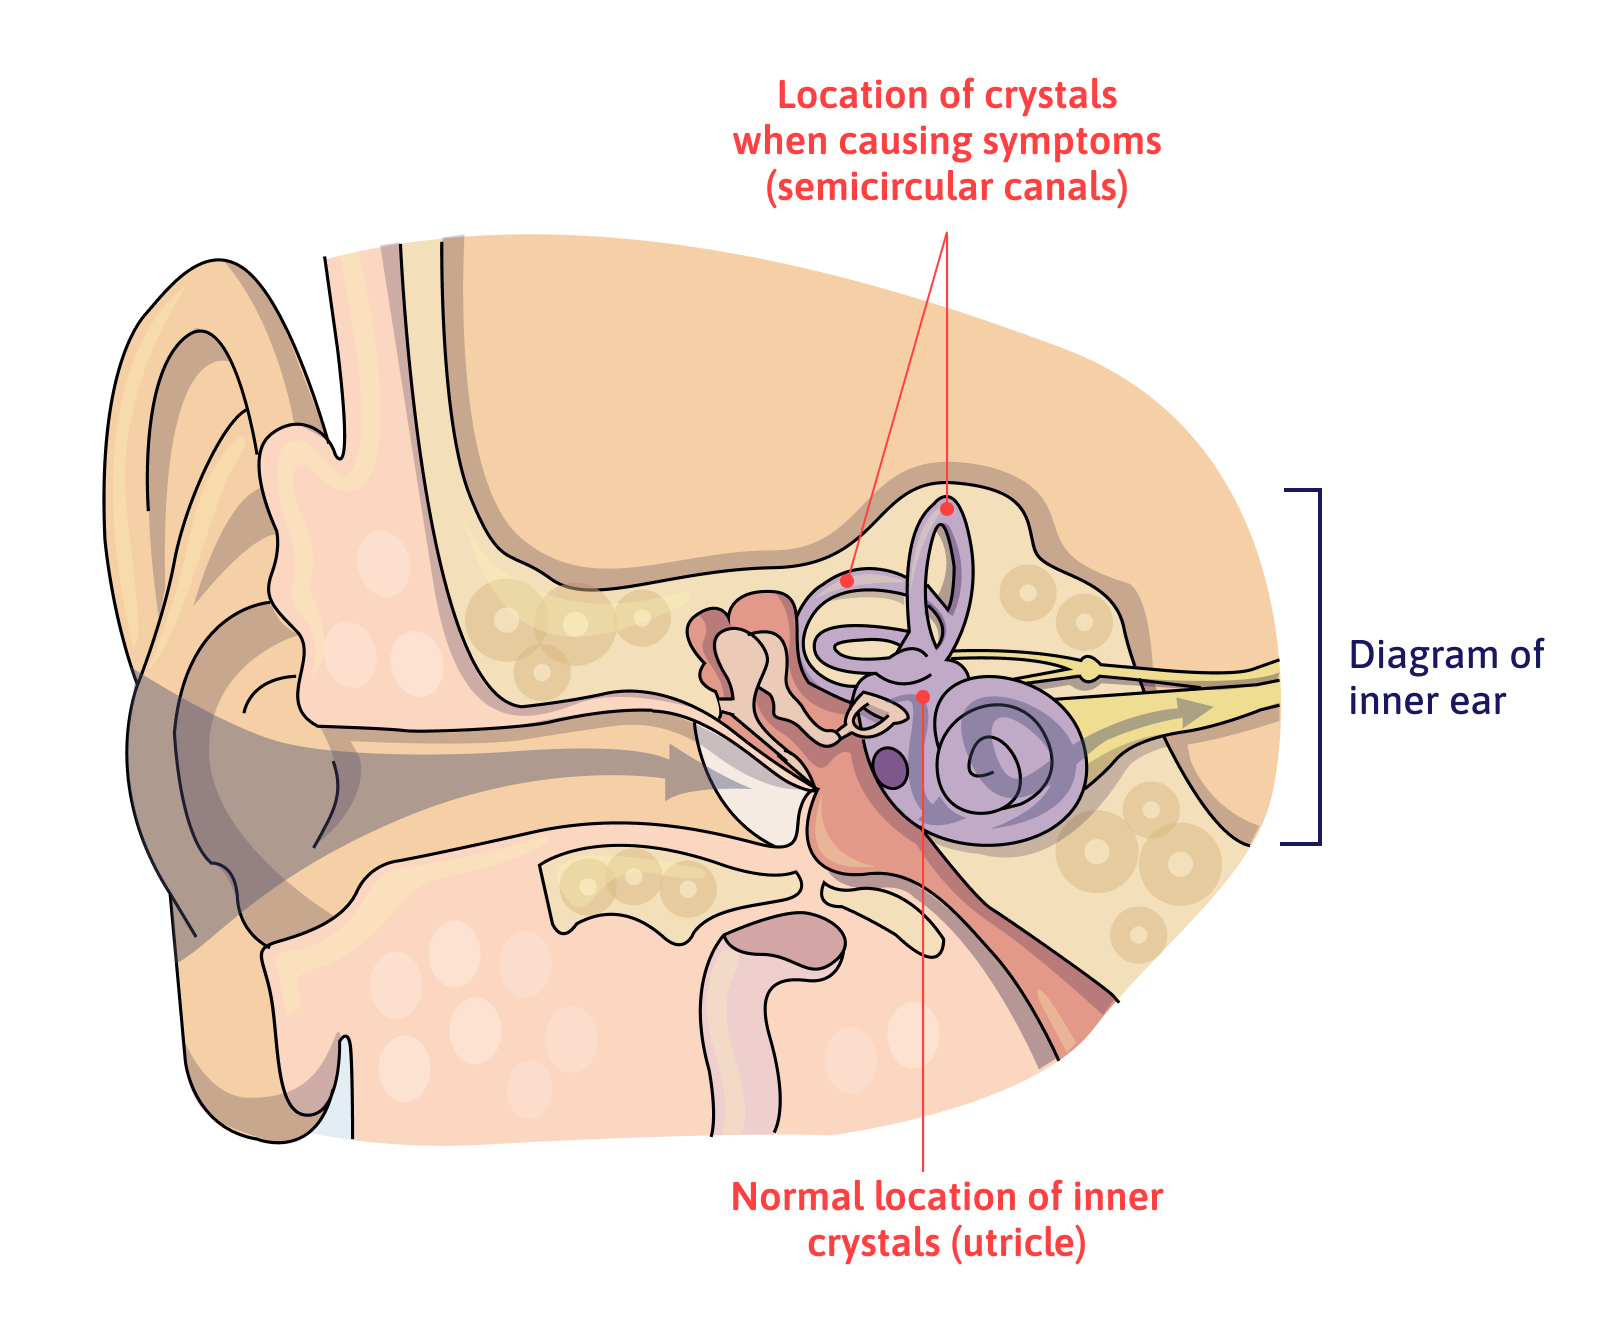 Diagram of the inner ear and location of crystals when causing symptoms (semicircular canals) vs their normal location (utricle).